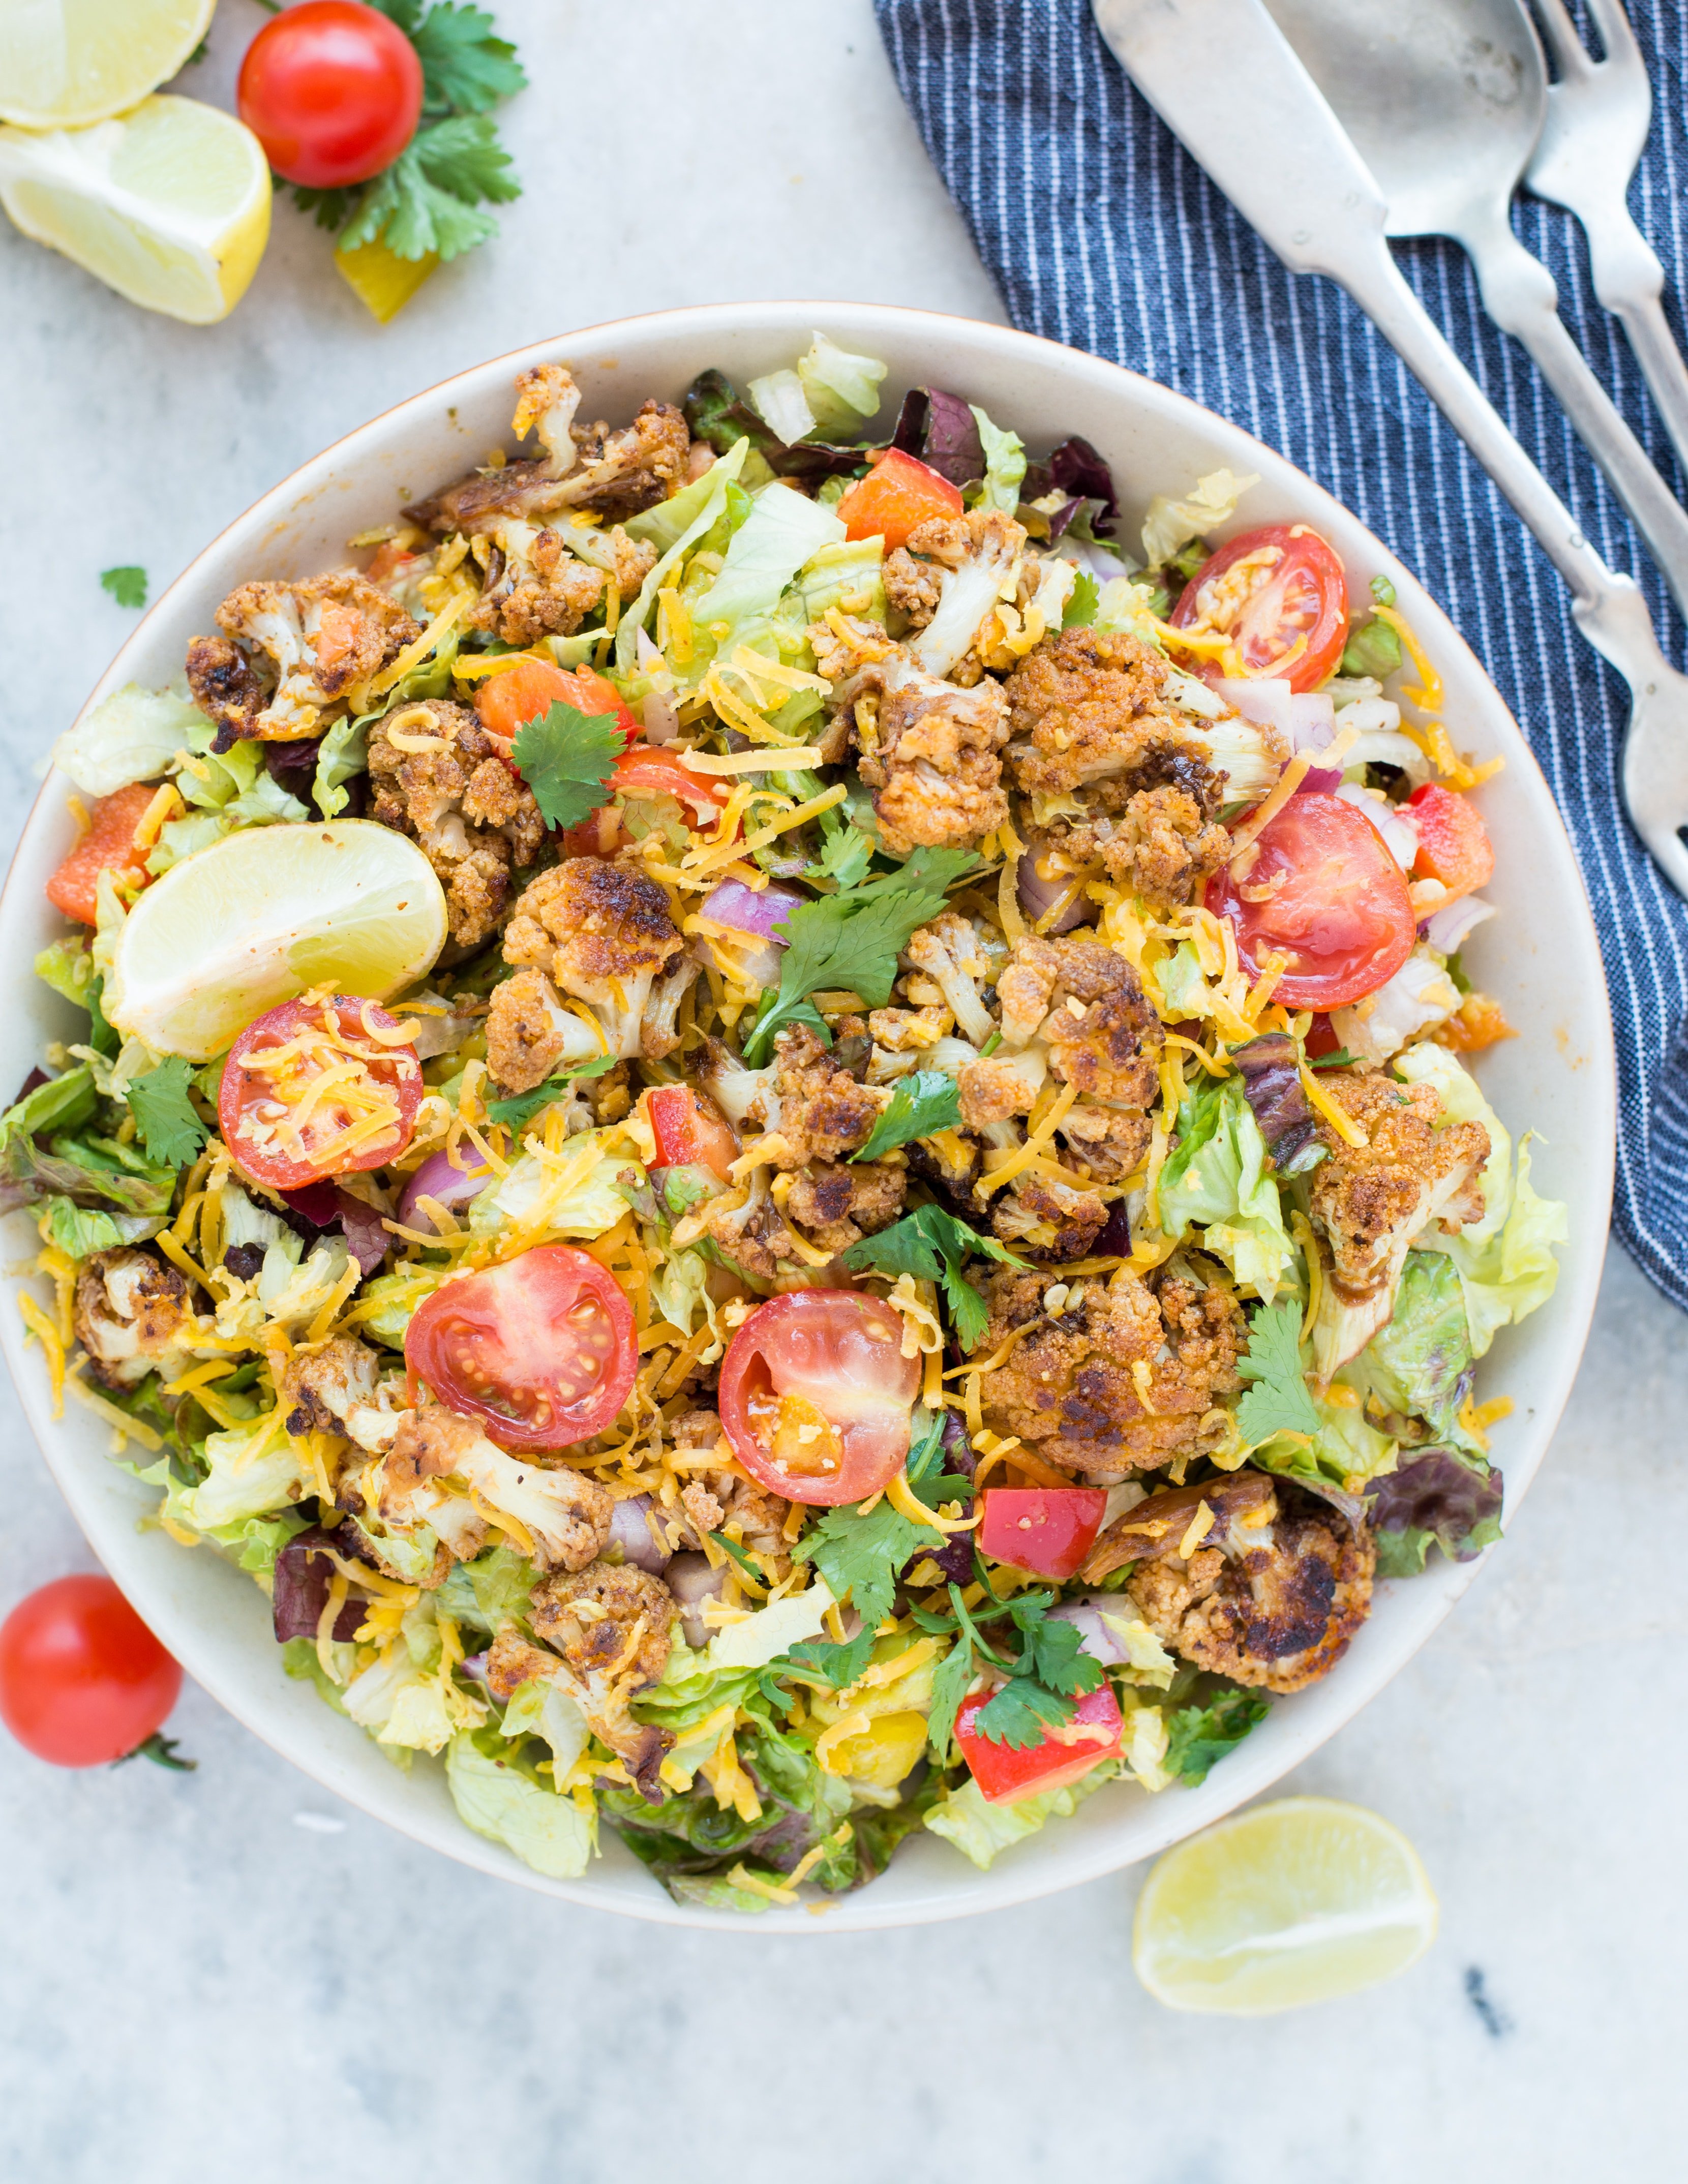  Healthy Taco Salad with Cauliflower is your answer for a low carb taco salad recipe. It is easy and comes together in 20 minutes. Perfect for a potluck.